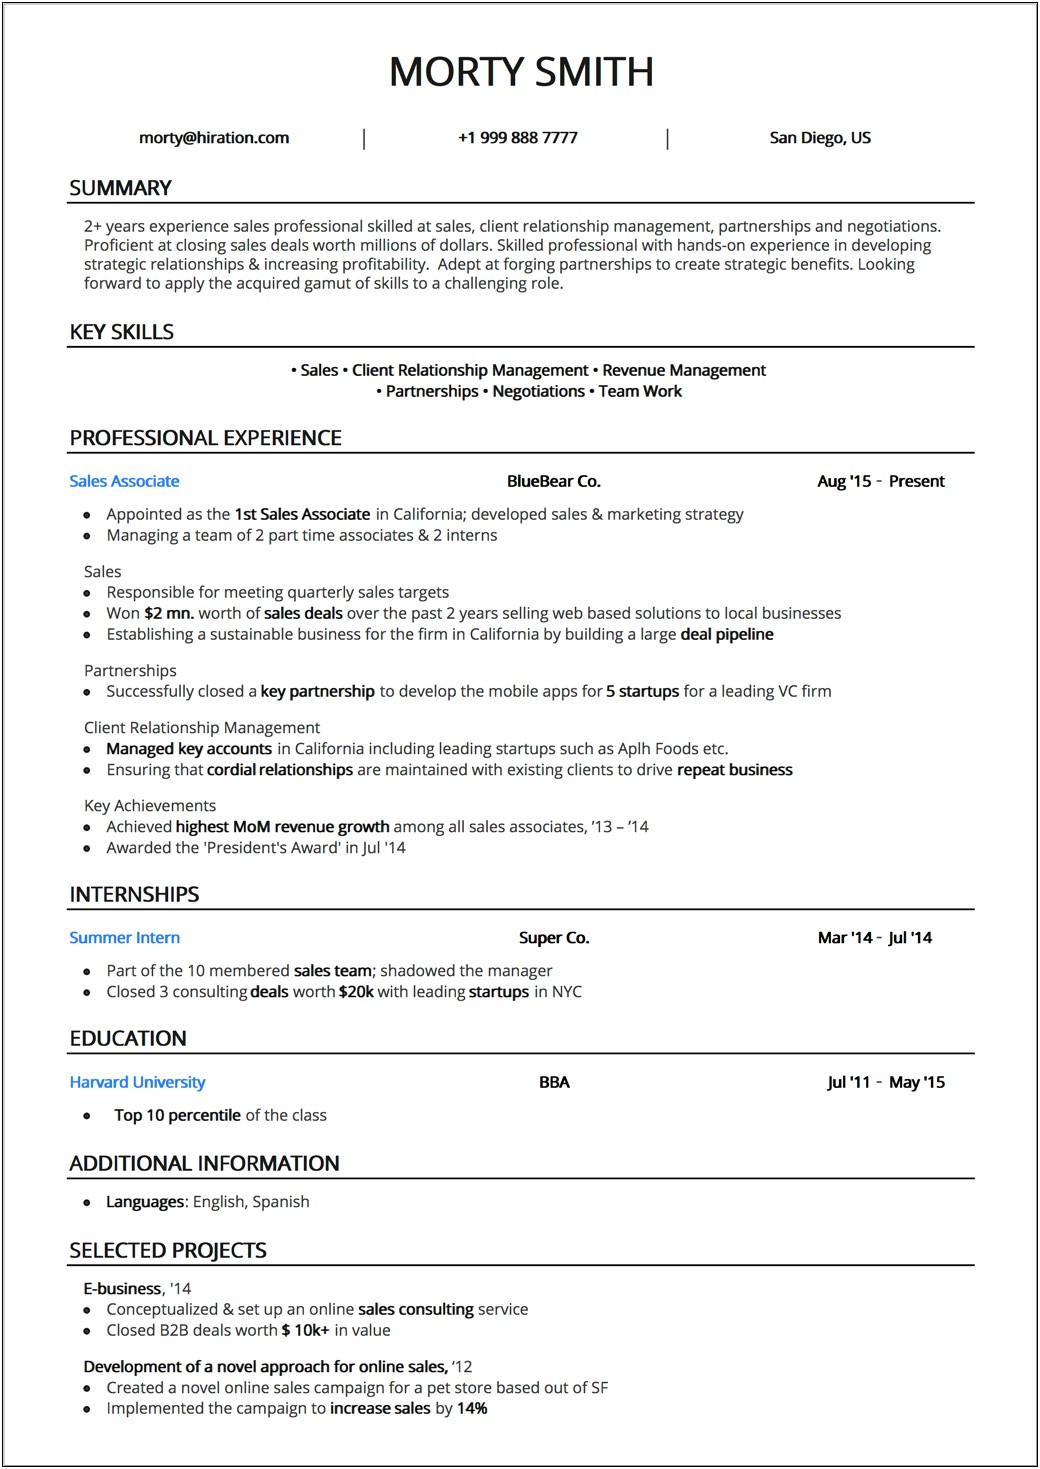 Effective Use Of Experience Column In Resume